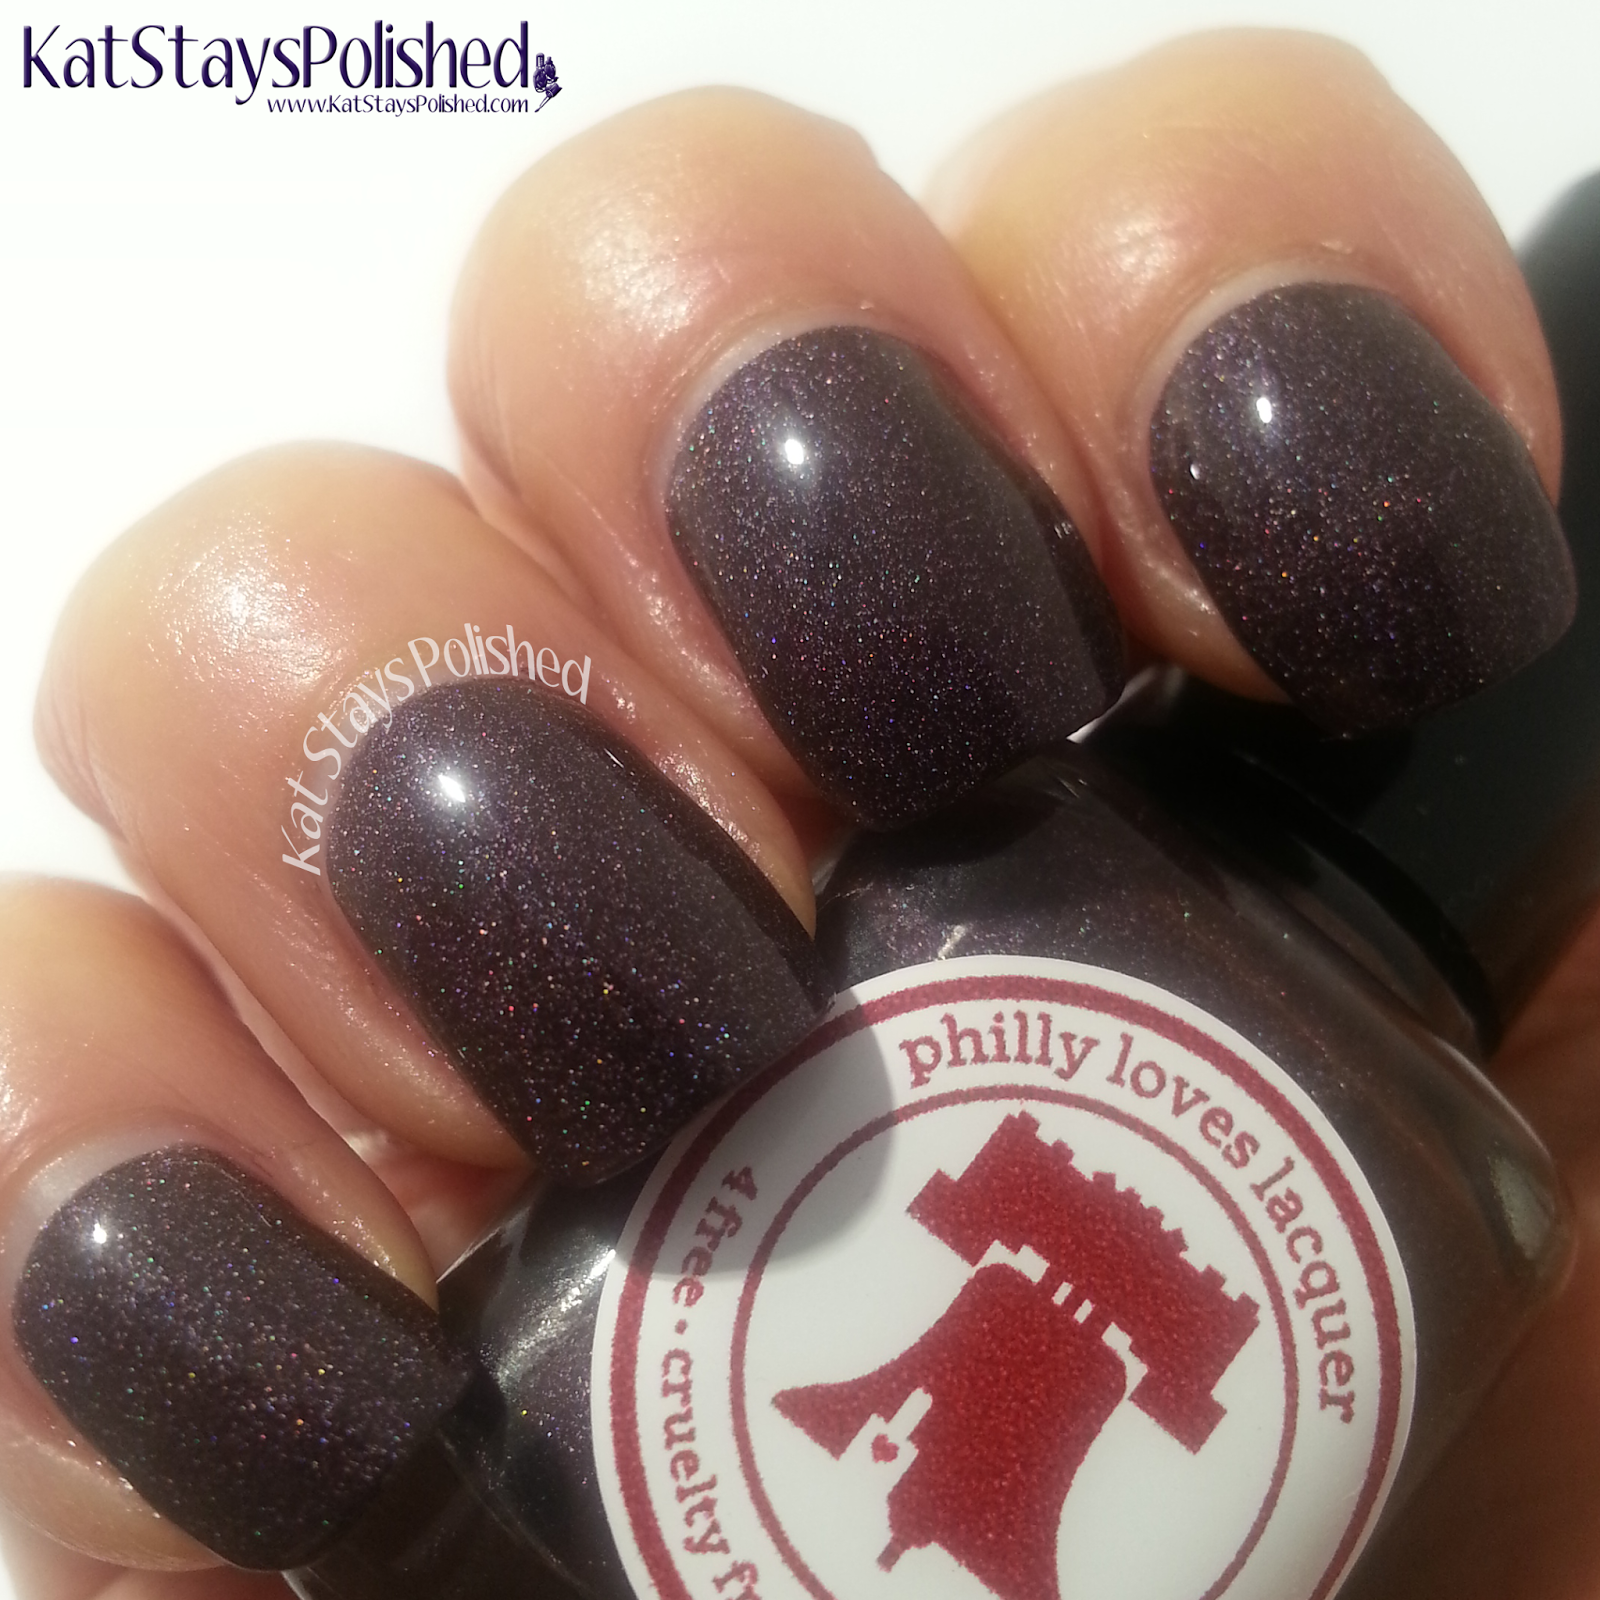 Philly Loves Lacquer: Shopping Madness Trio - 2AM Coffee Run | Kat Stays Polished